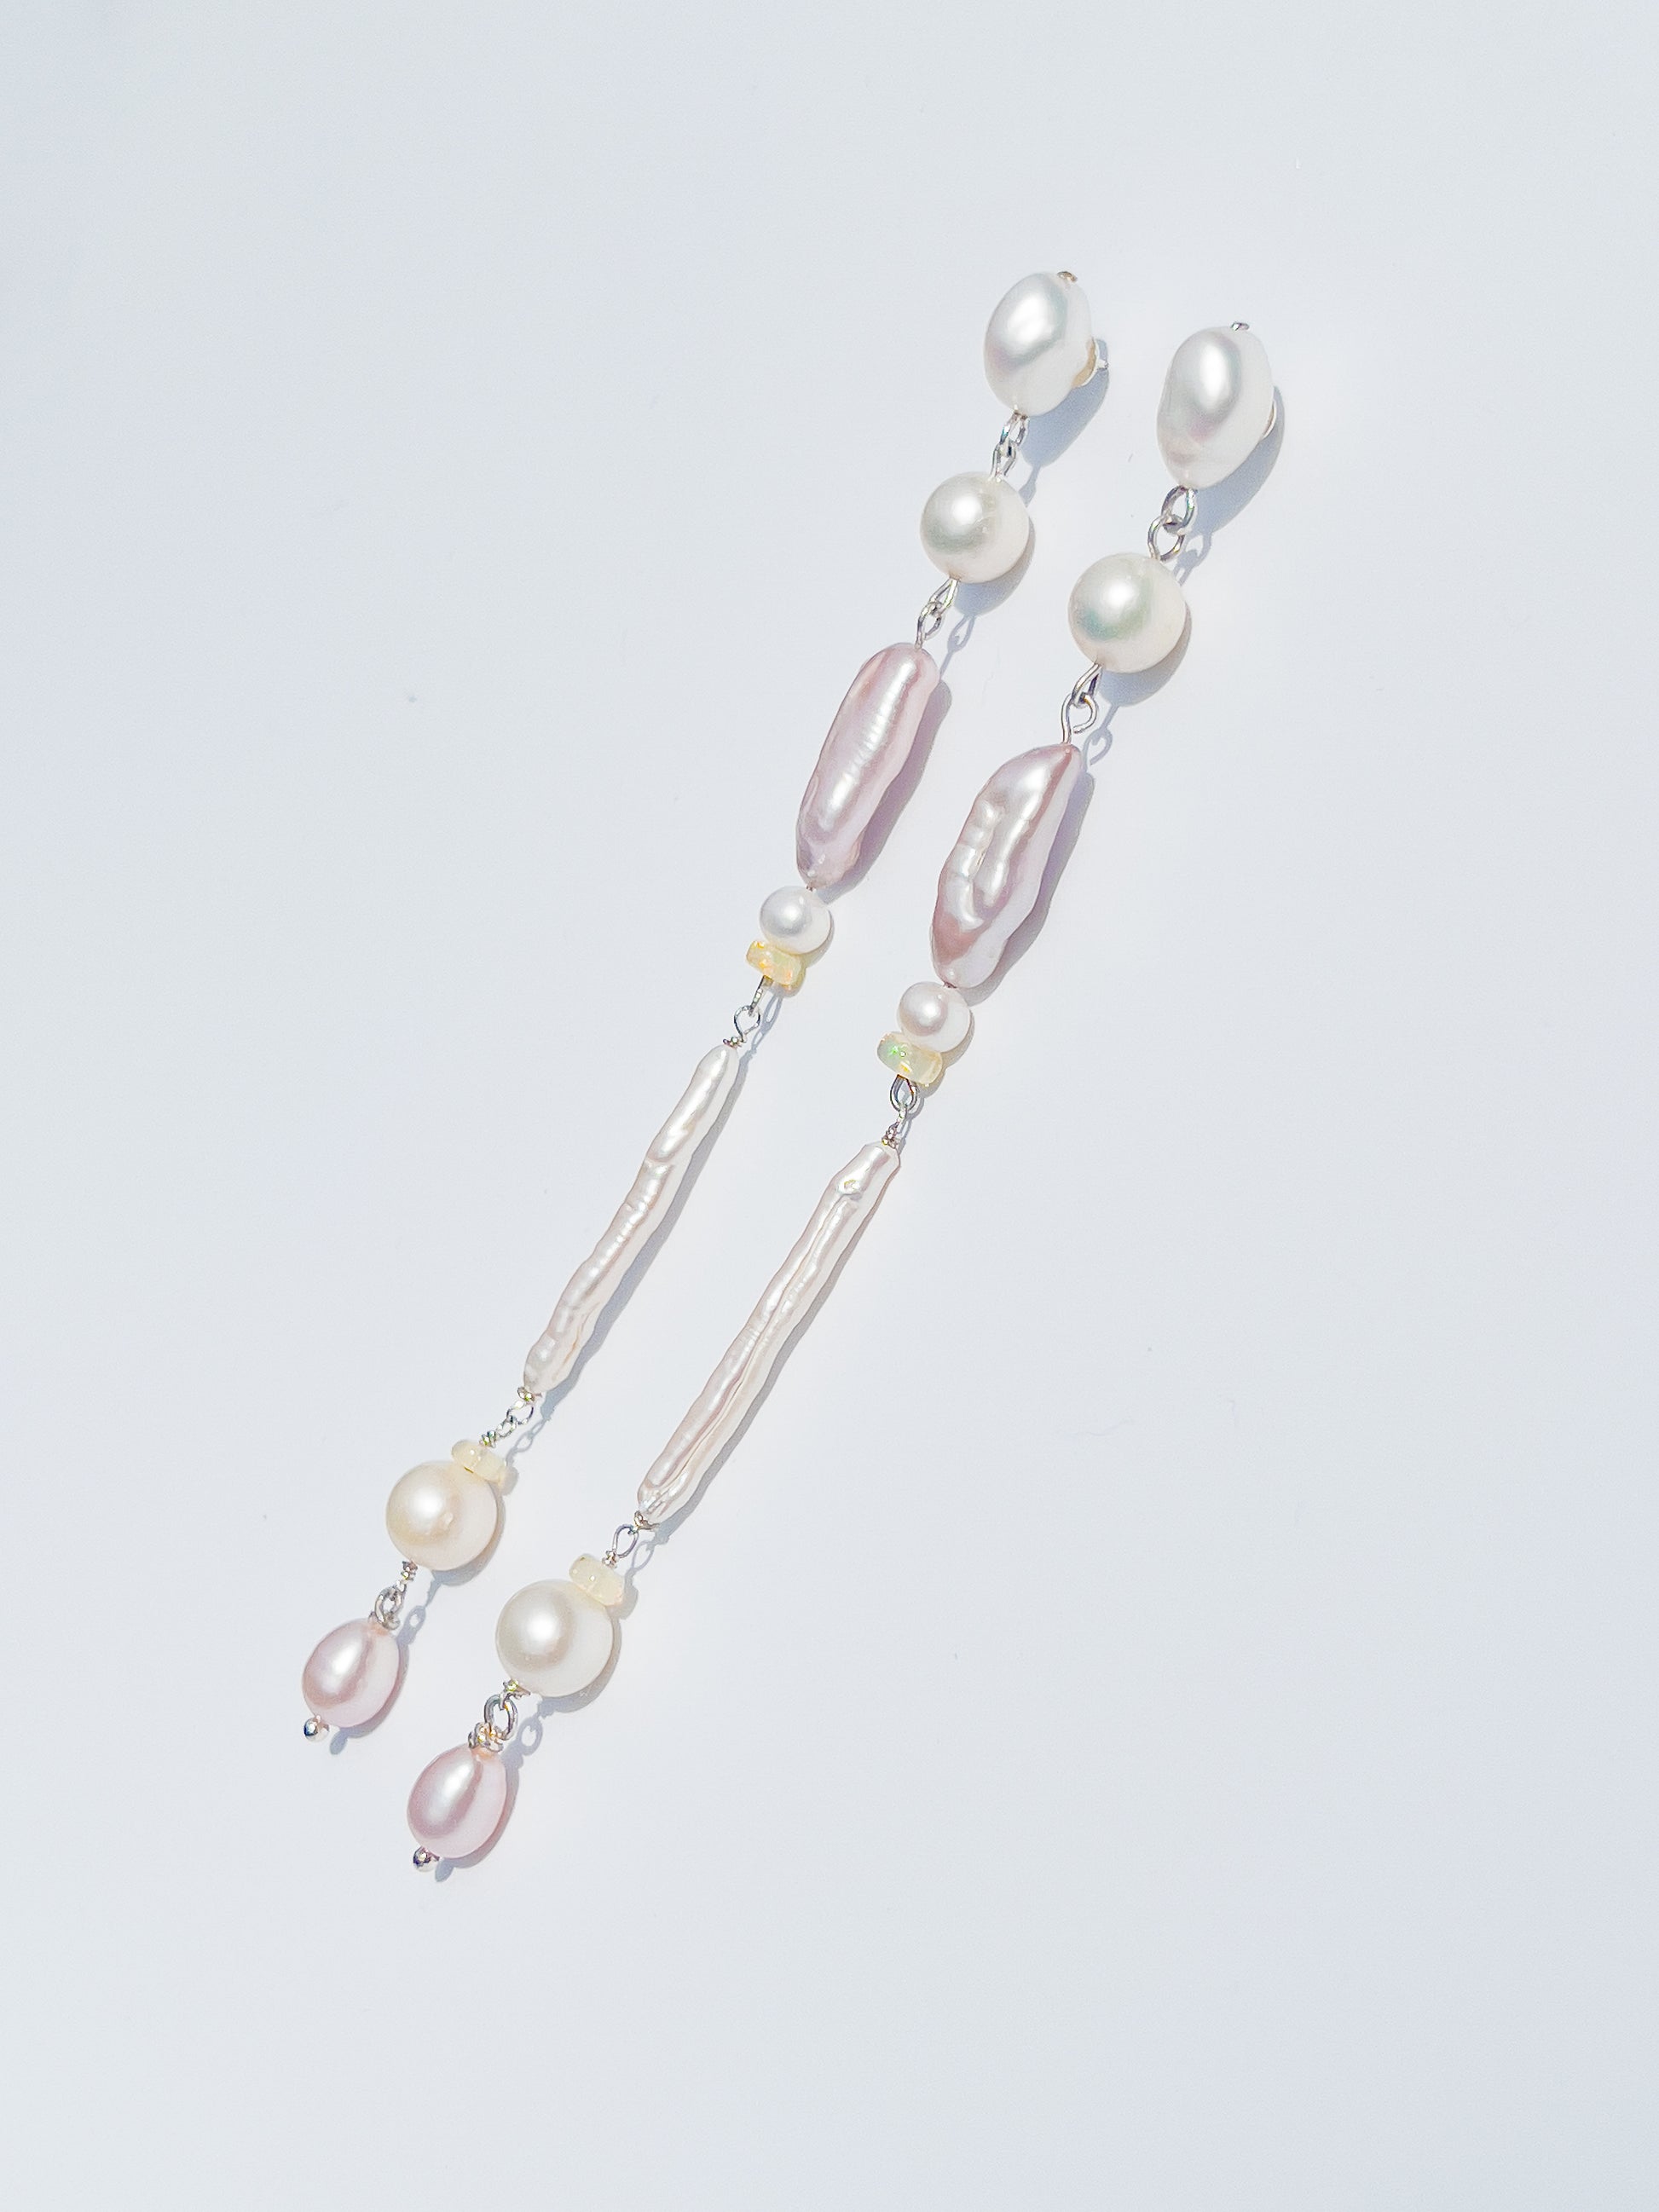 Candy Pearl & Opal Drop Earrings - These earrings are an absolute showstopper. Hand crafted using Sterling Silver, which suspend a combination of Violet Keshi Pearls, South Sea Pearls, Opals, Biwa Pearls, Freshwater Pearls and Luxe Violet teardrop pearls. These earrings glisten in candy colours, and are uniquely gorgeous in every way.